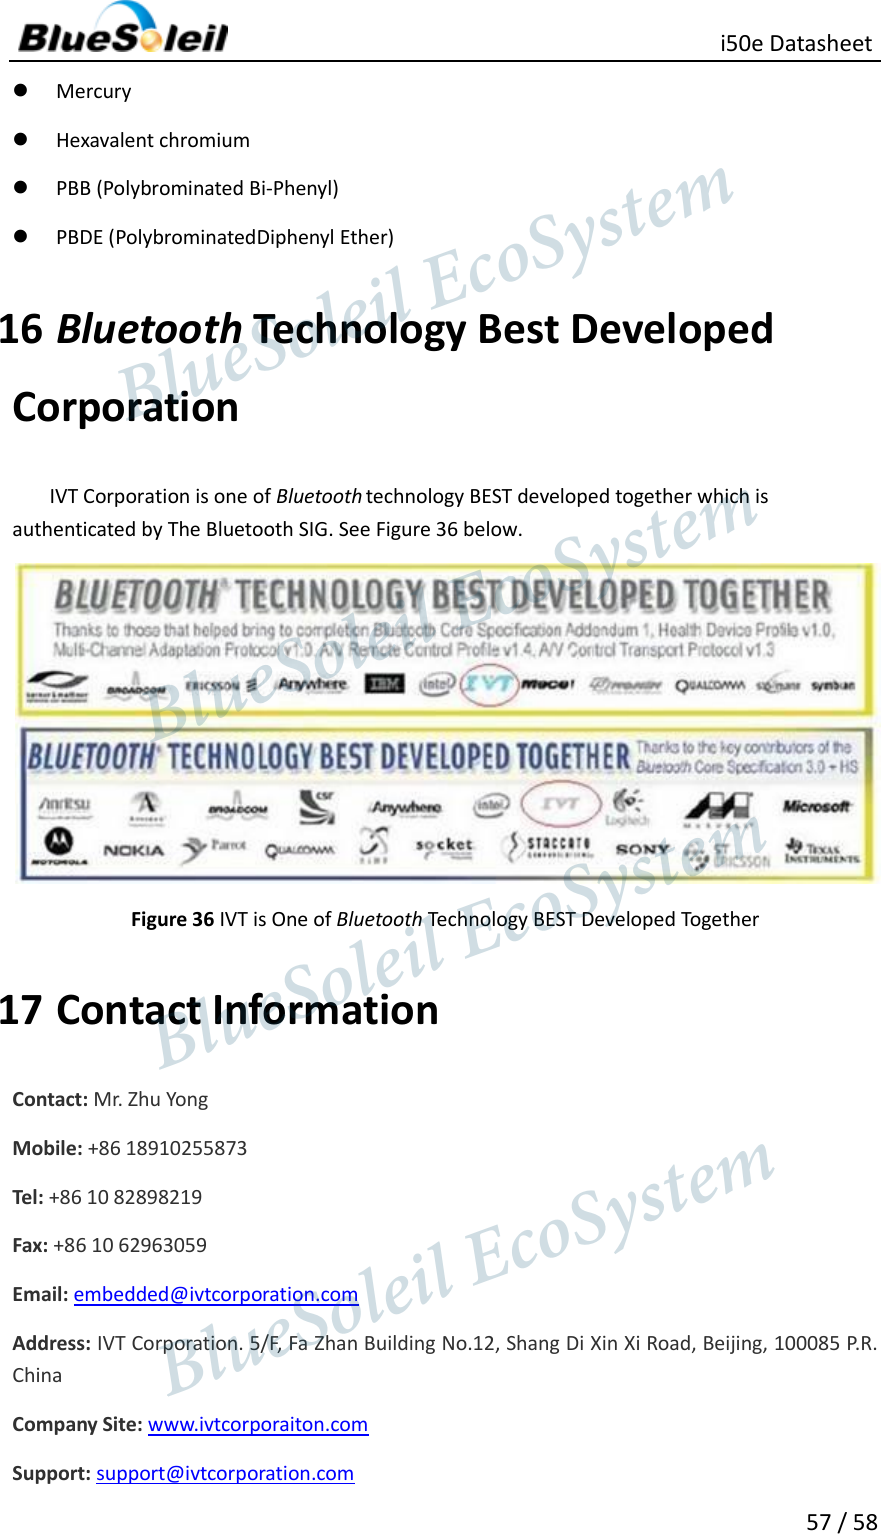                                                   i50e Datasheet 57 / 58  Mercury  Hexavalent chromium  PBB (Polybrominated Bi-Phenyl)  PBDE (PolybrominatedDiphenyl Ether) 16 Bluetooth Technology Best Developed Corporation IVT Corporation is one of Bluetooth technology BEST developed together which is authenticated by The Bluetooth SIG. See Figure 36 below.  Figure 36 IVT is One of Bluetooth Technology BEST Developed Together 17 Contact Information Contact: Mr. Zhu Yong Mobile: +86 18910255873 Tel: +86 10 82898219 Fax: +86 10 62963059 Email: embedded@ivtcorporation.com Address: IVT Corporation. 5/F, Fa Zhan Building No.12, Shang Di Xin Xi Road, Beijing, 100085 P.R. China Company Site: www.ivtcorporaiton.com Support: support@ivtcorporation.com                  BlueSoleil EcoSystem            BlueSoleil EcoSystem      BlueSoleil EcoSystemBlueSoleil EcoSystem